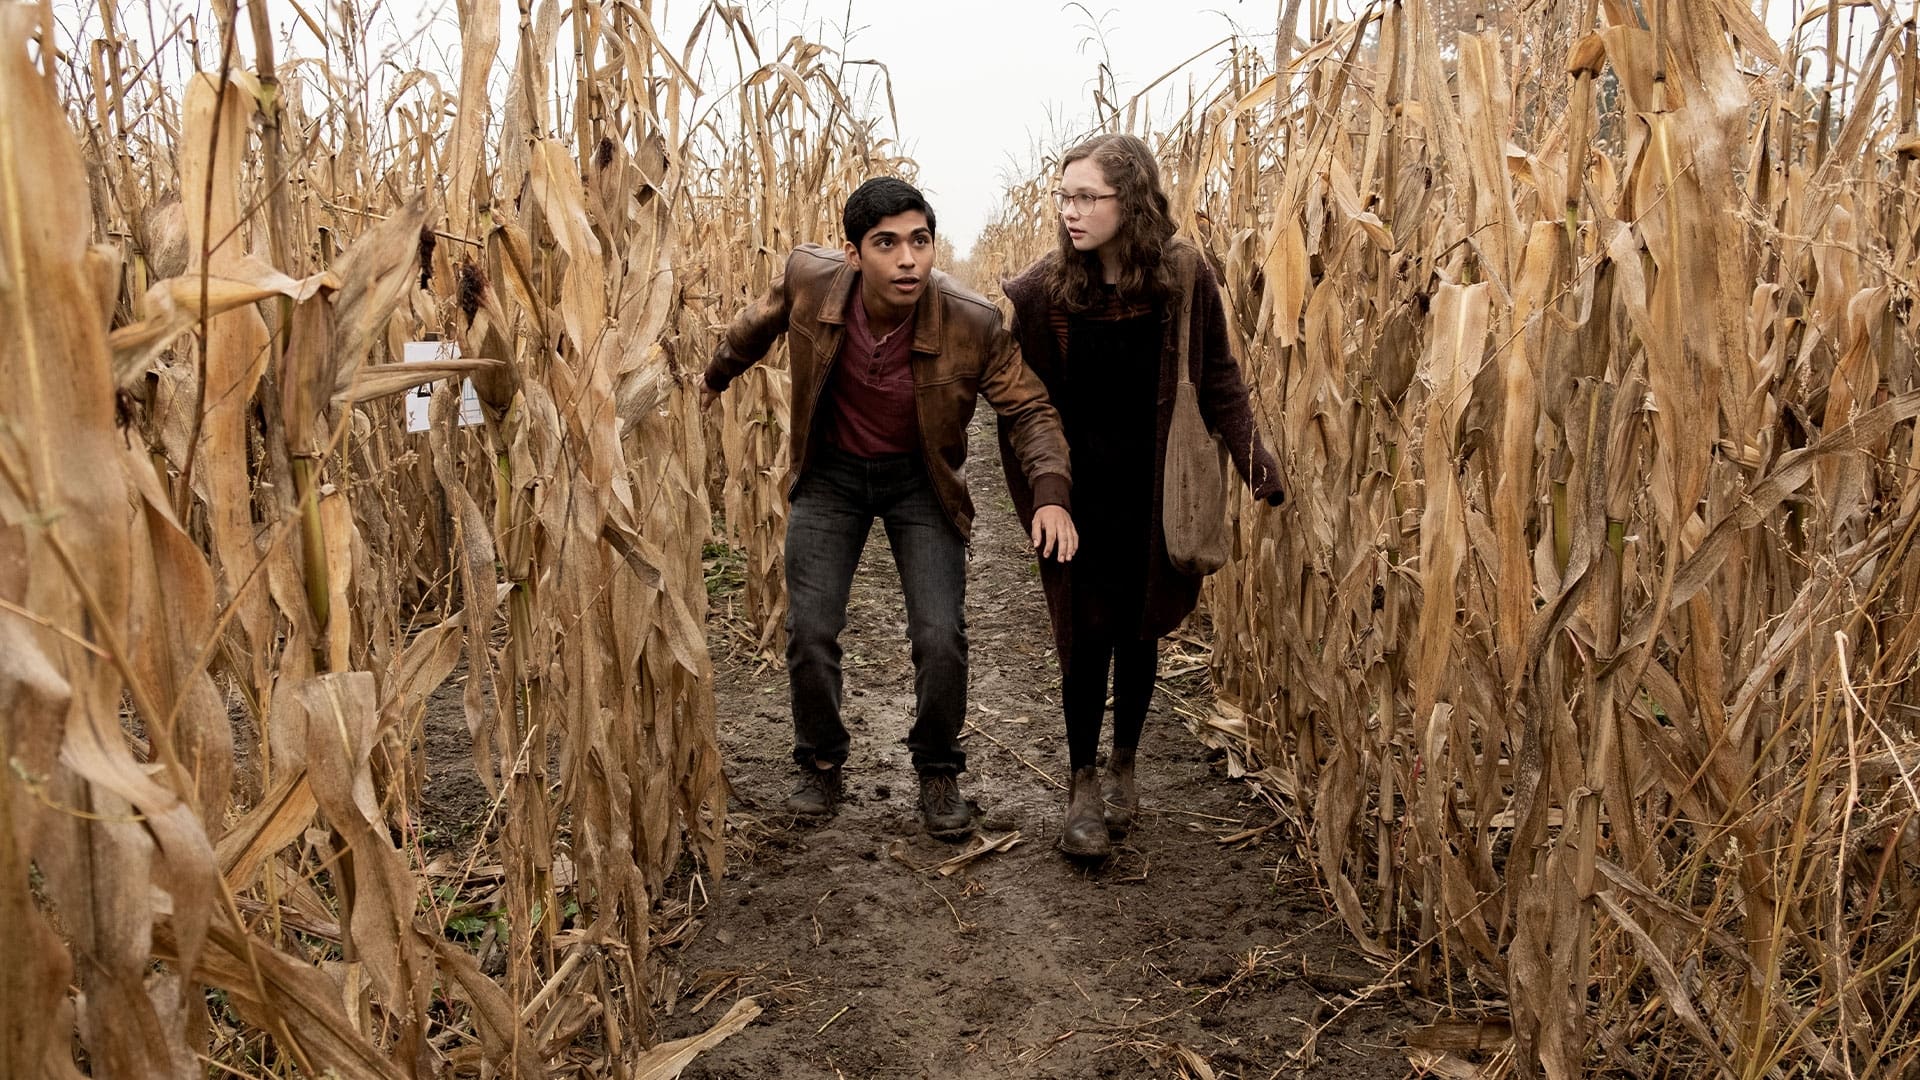 Screenshot from the film Scary Stories to Tell in the Dark. Two young teens explore a corn field.